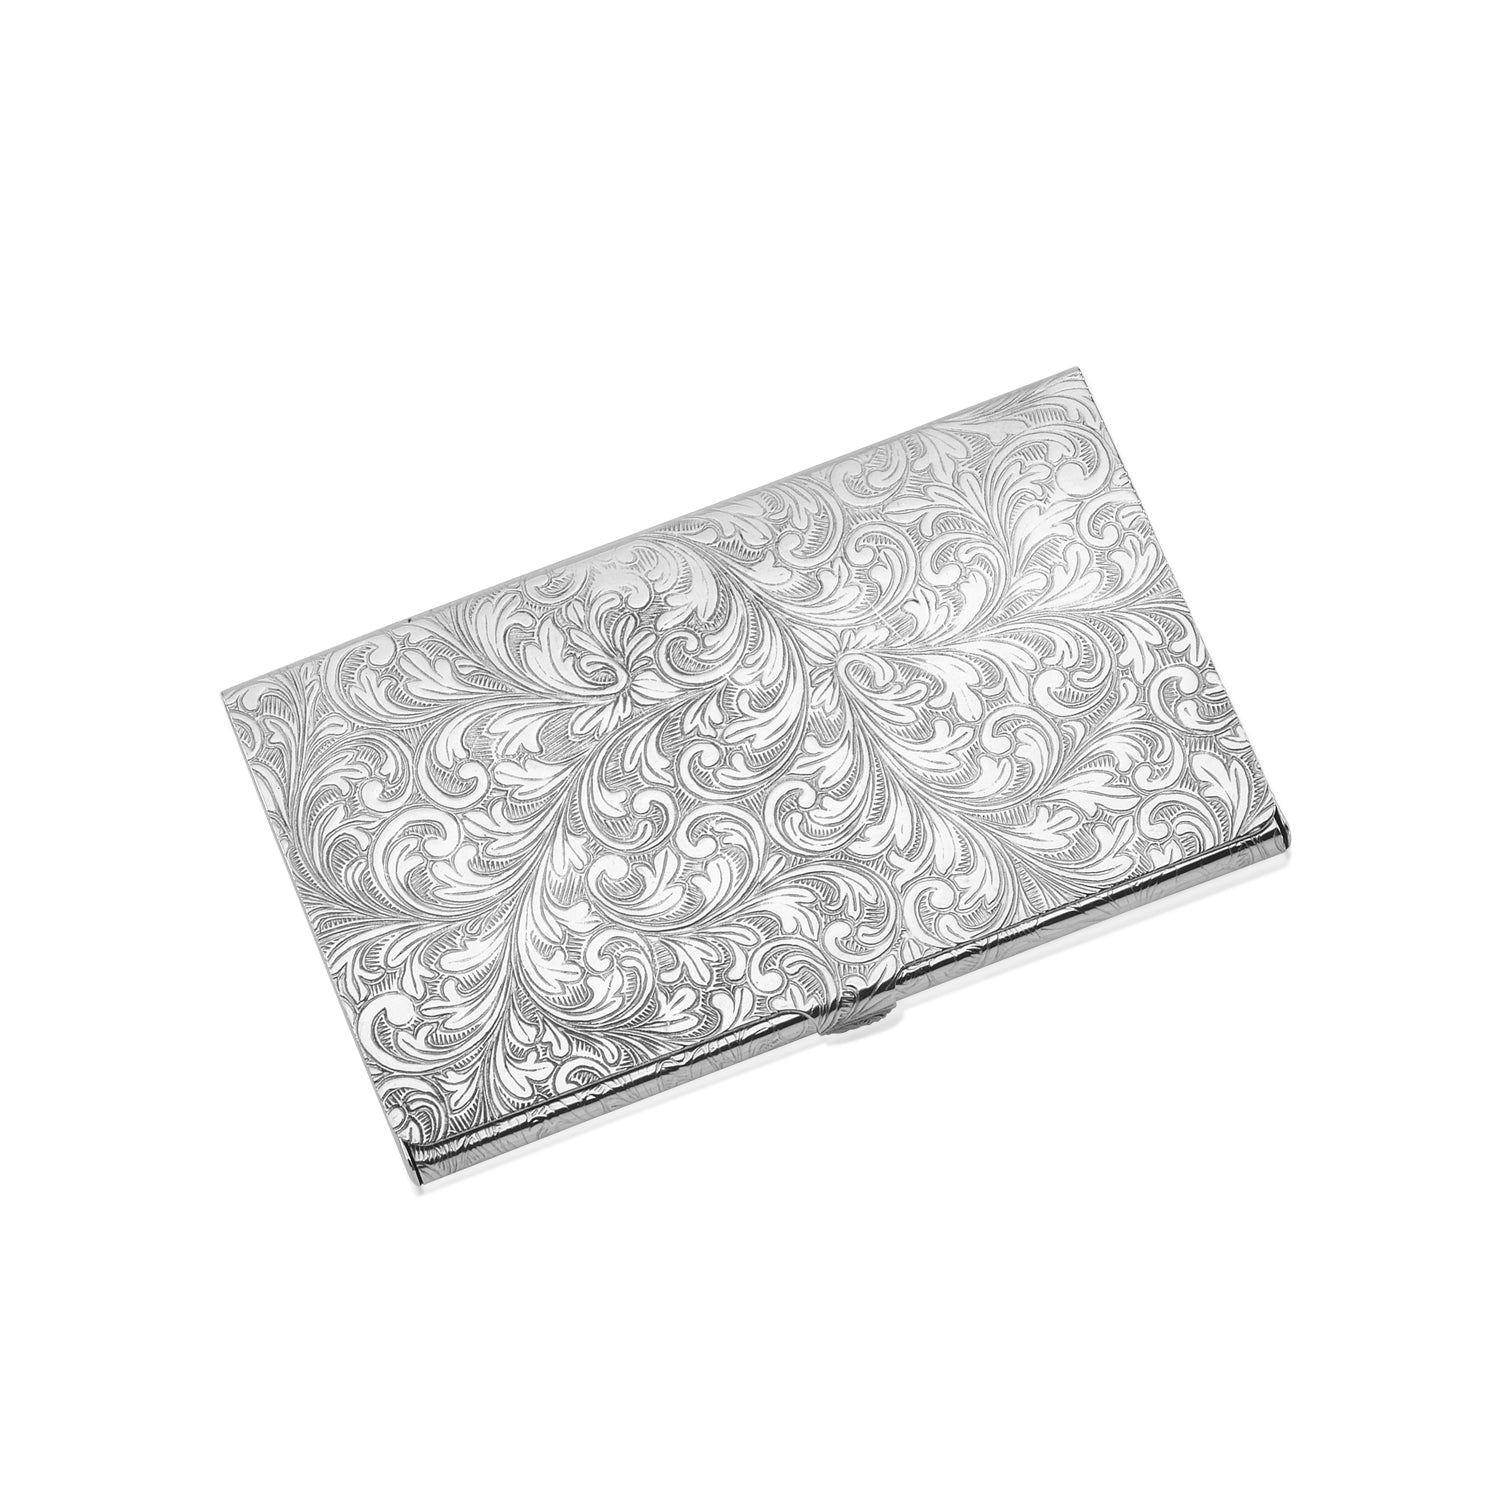 Zsamuel Luxury Sterling Silver 925 Business Card Holder Italy